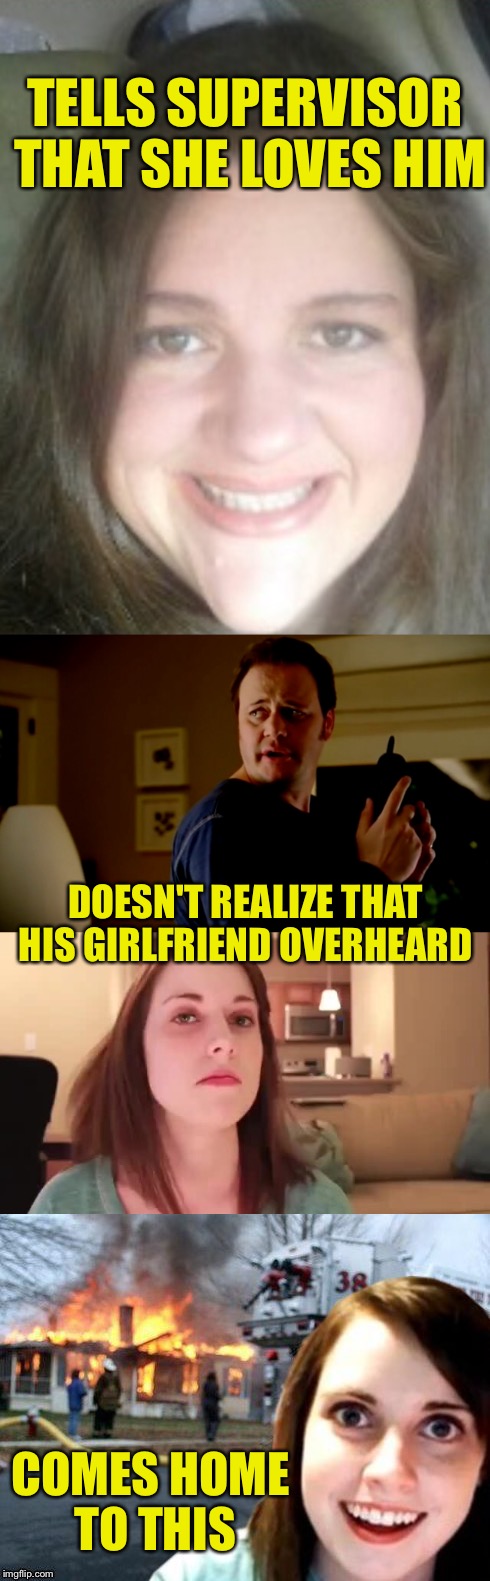 TELLS SUPERVISOR THAT SHE LOVES HIM DOESN'T REALIZE THAT HIS GIRLFRIEND OVERHEARD COMES HOME TO THIS | made w/ Imgflip meme maker